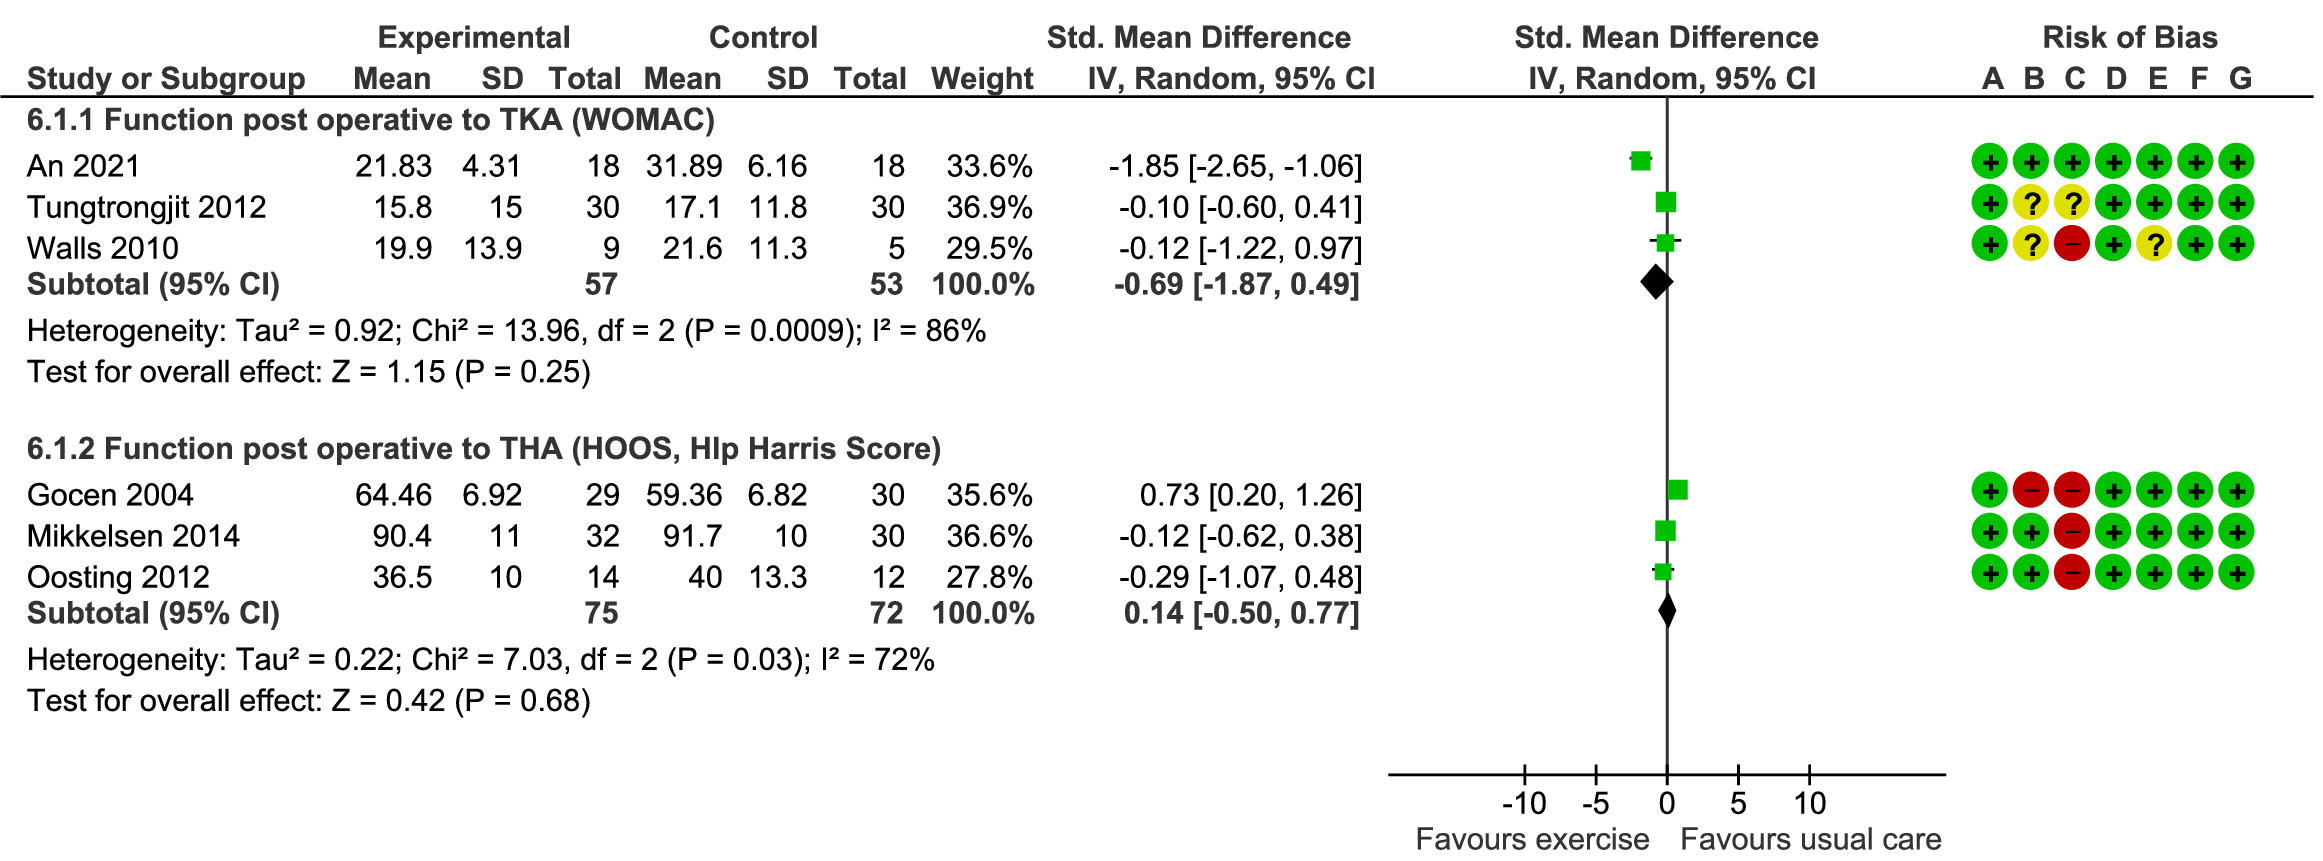 Fig. 6 
            Effect of prehabilitation vs standard care on function post total knee arthroplasty (TKA) and total hip arthroplasty (THA). CI, confidence interval; HOOS, Hip Disability and Osteoarthritis Outcome score; IV, inverse variance; SD, standard deviation; WOMAC, Western Ontario and McMaster Universities Osteoarthritis Index.
          